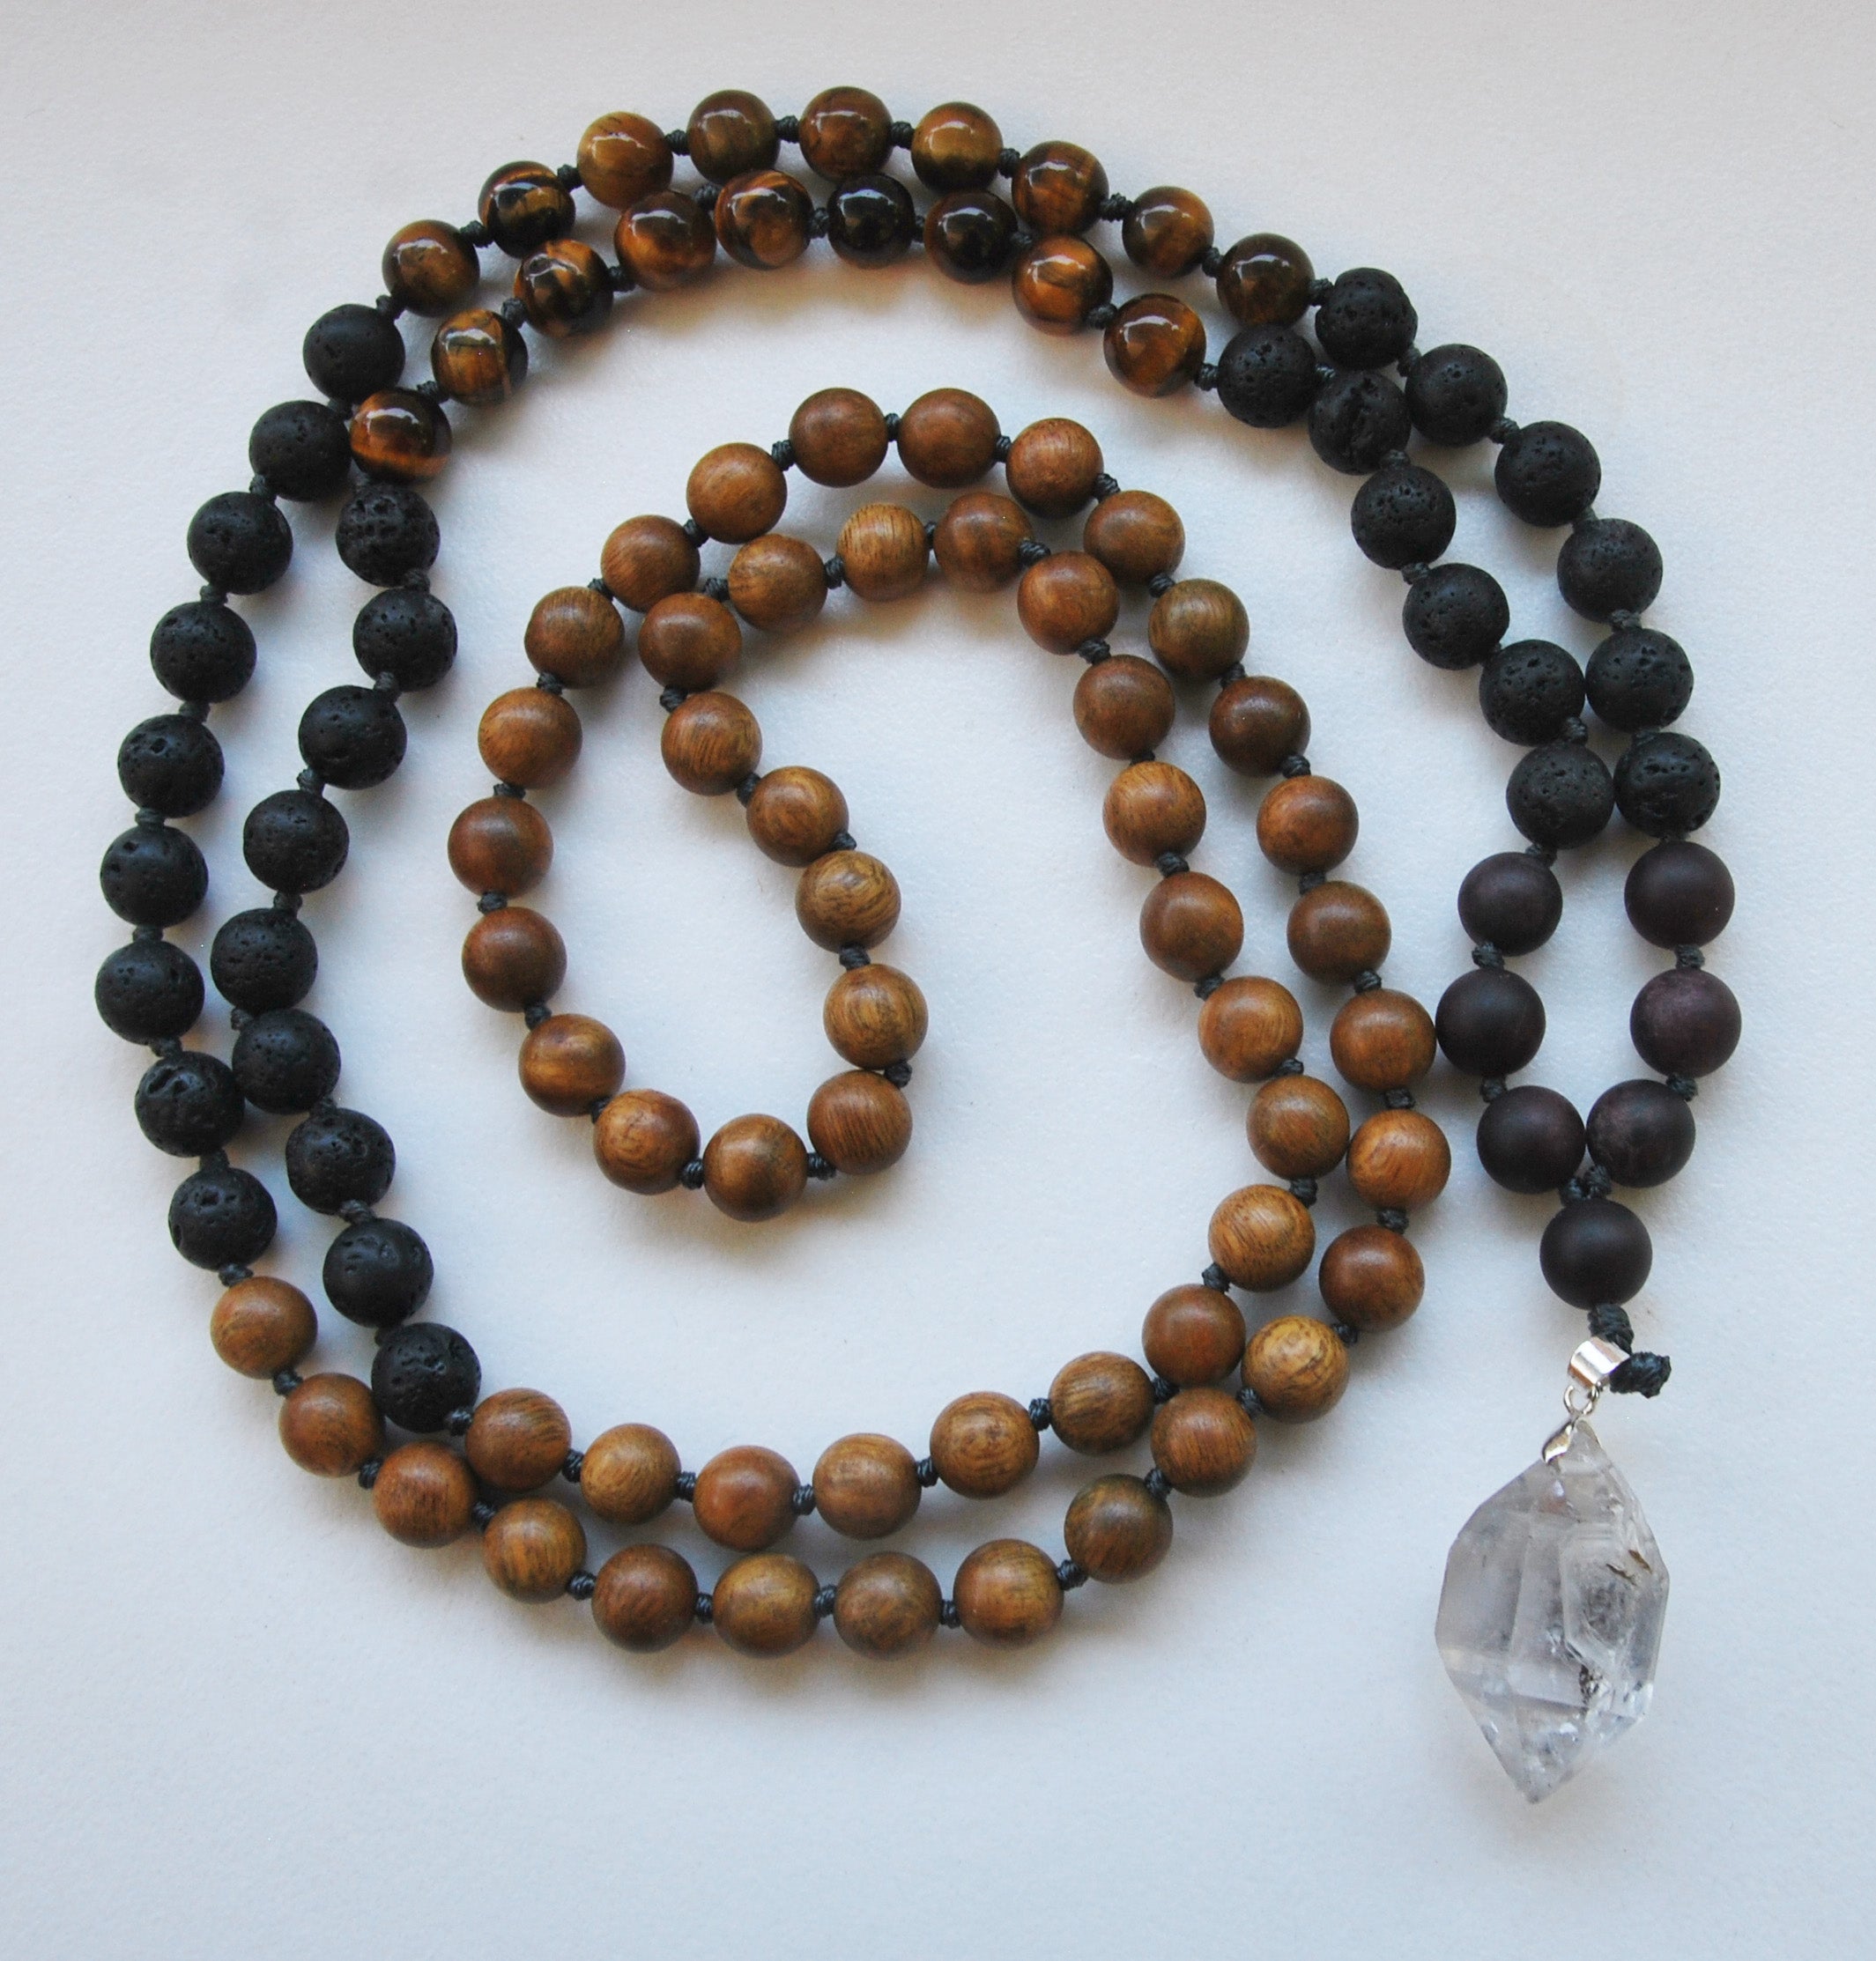 8mm Green Sandalwood & Tigers Eye 108 Knotted Mala Necklace with Crystal Pendant